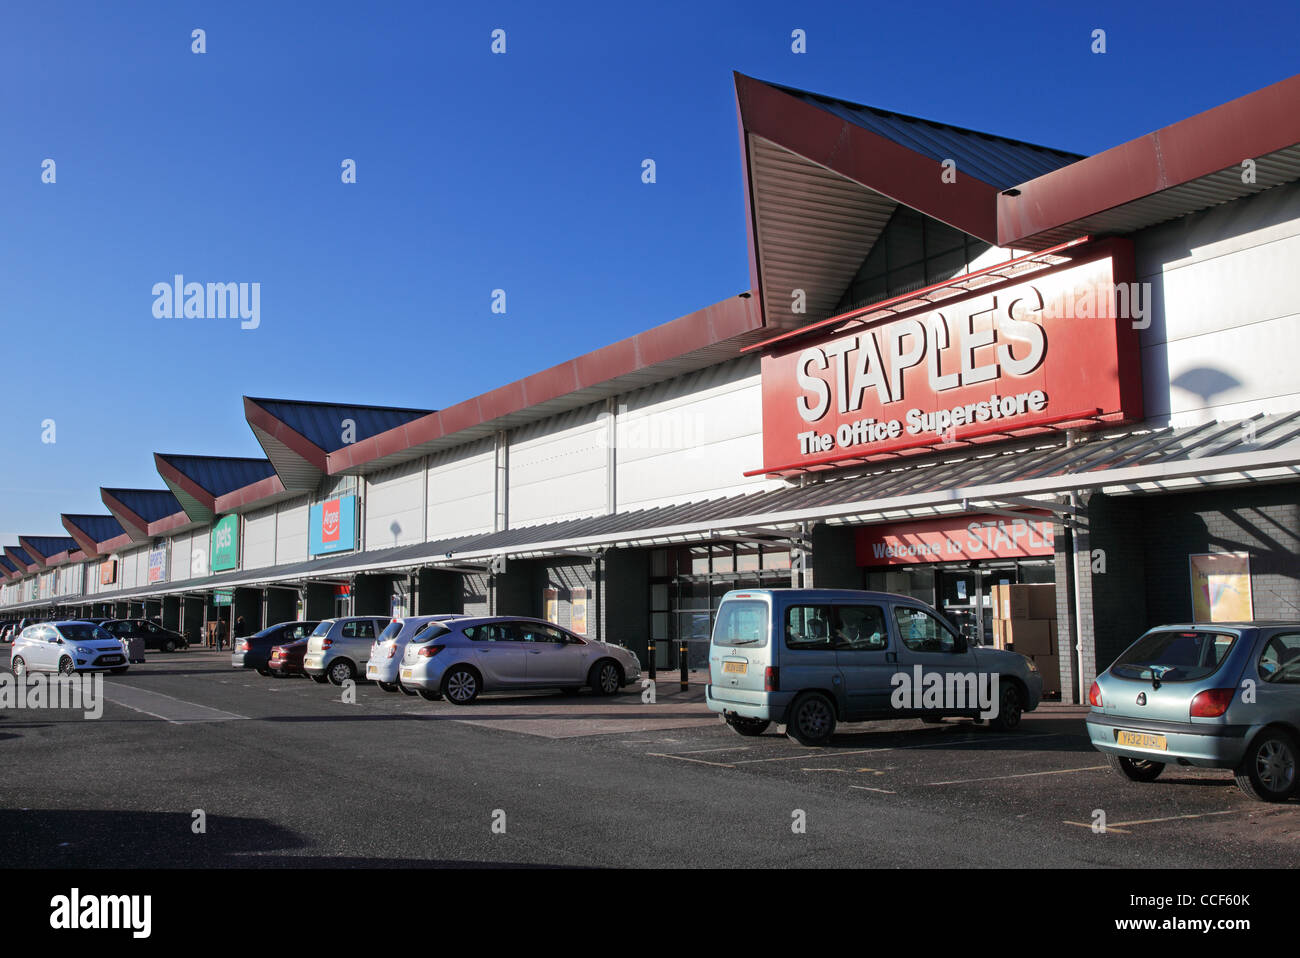 Staples and other stores in the Hylton out of town retail park in Sunderland, north east England UK Stock Photo